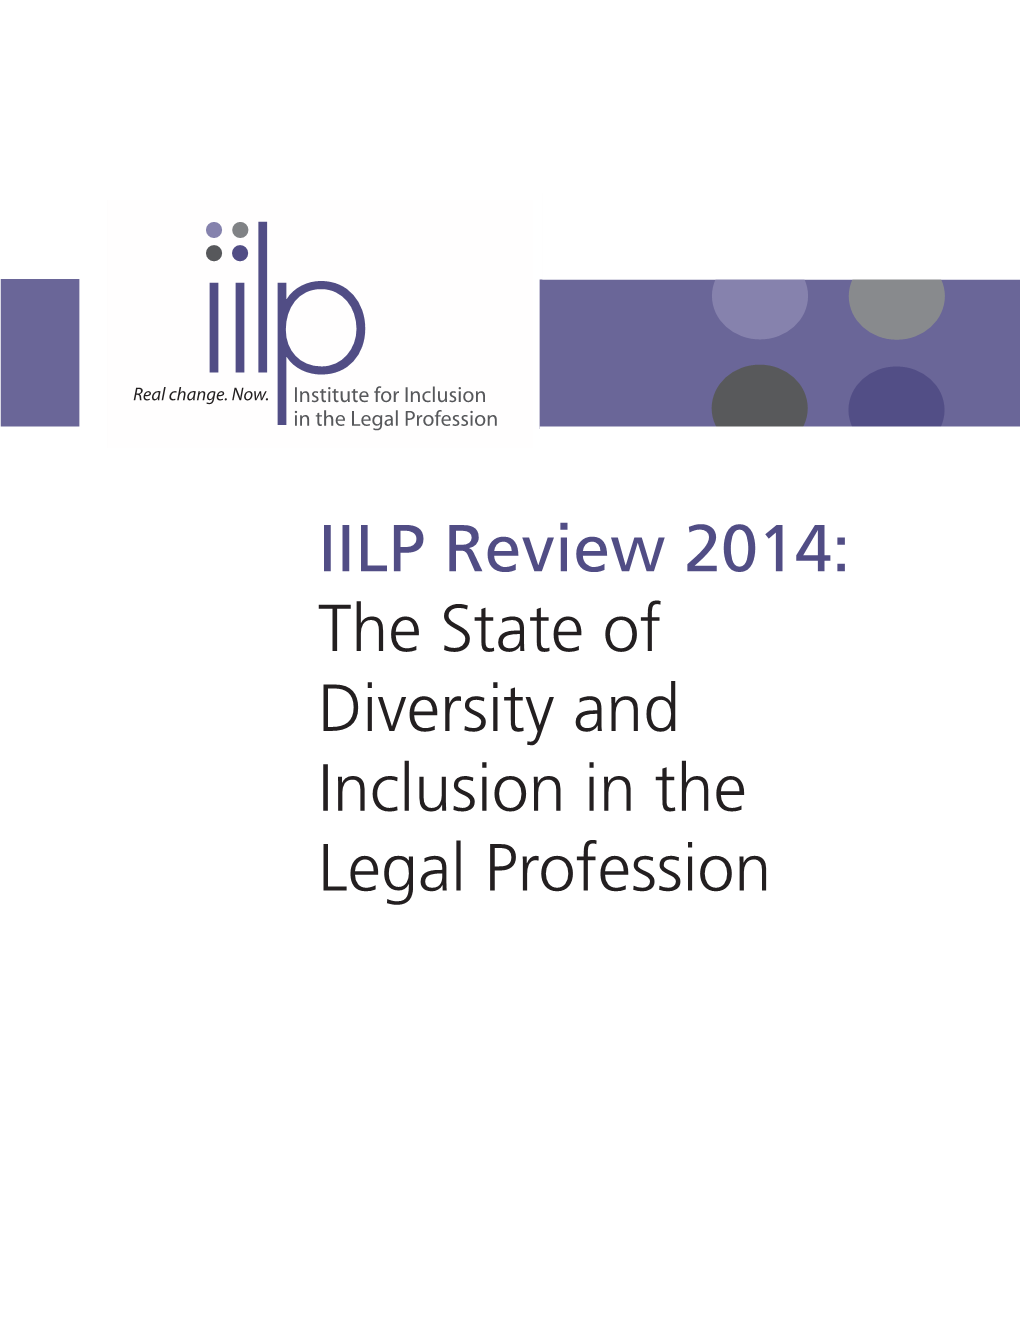 IILP Review 2014: the State of Diversity and Inclusion in the Legal Profession © 2014 Institute for Inclusion in the Legal Profession All Rights Reserved